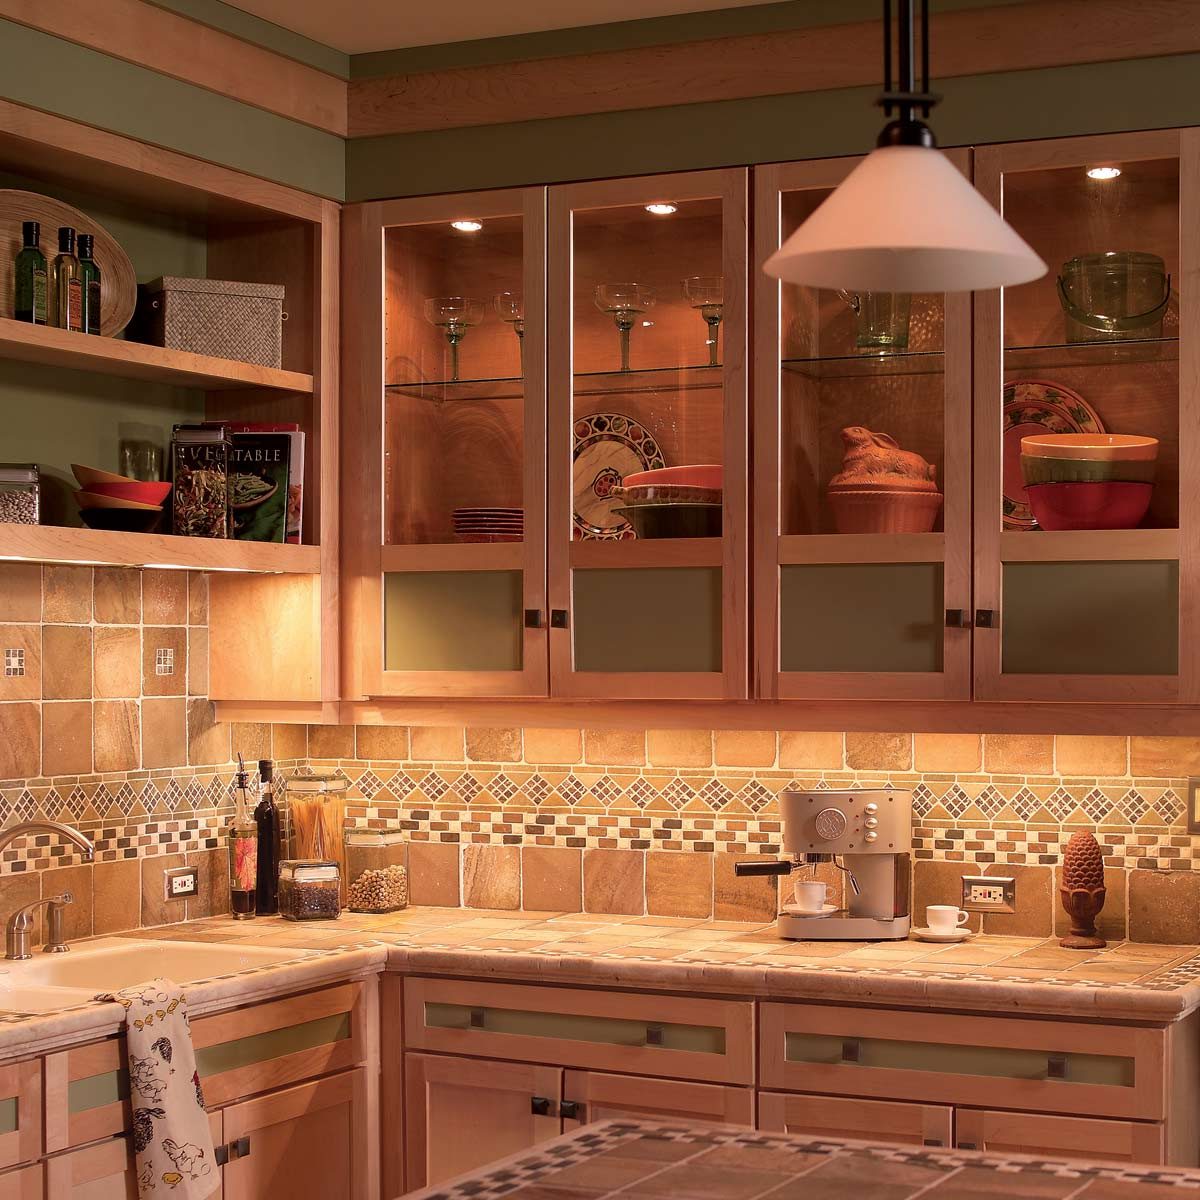 How To Install Under Cabinet Lighting In Your Kitchen Diy